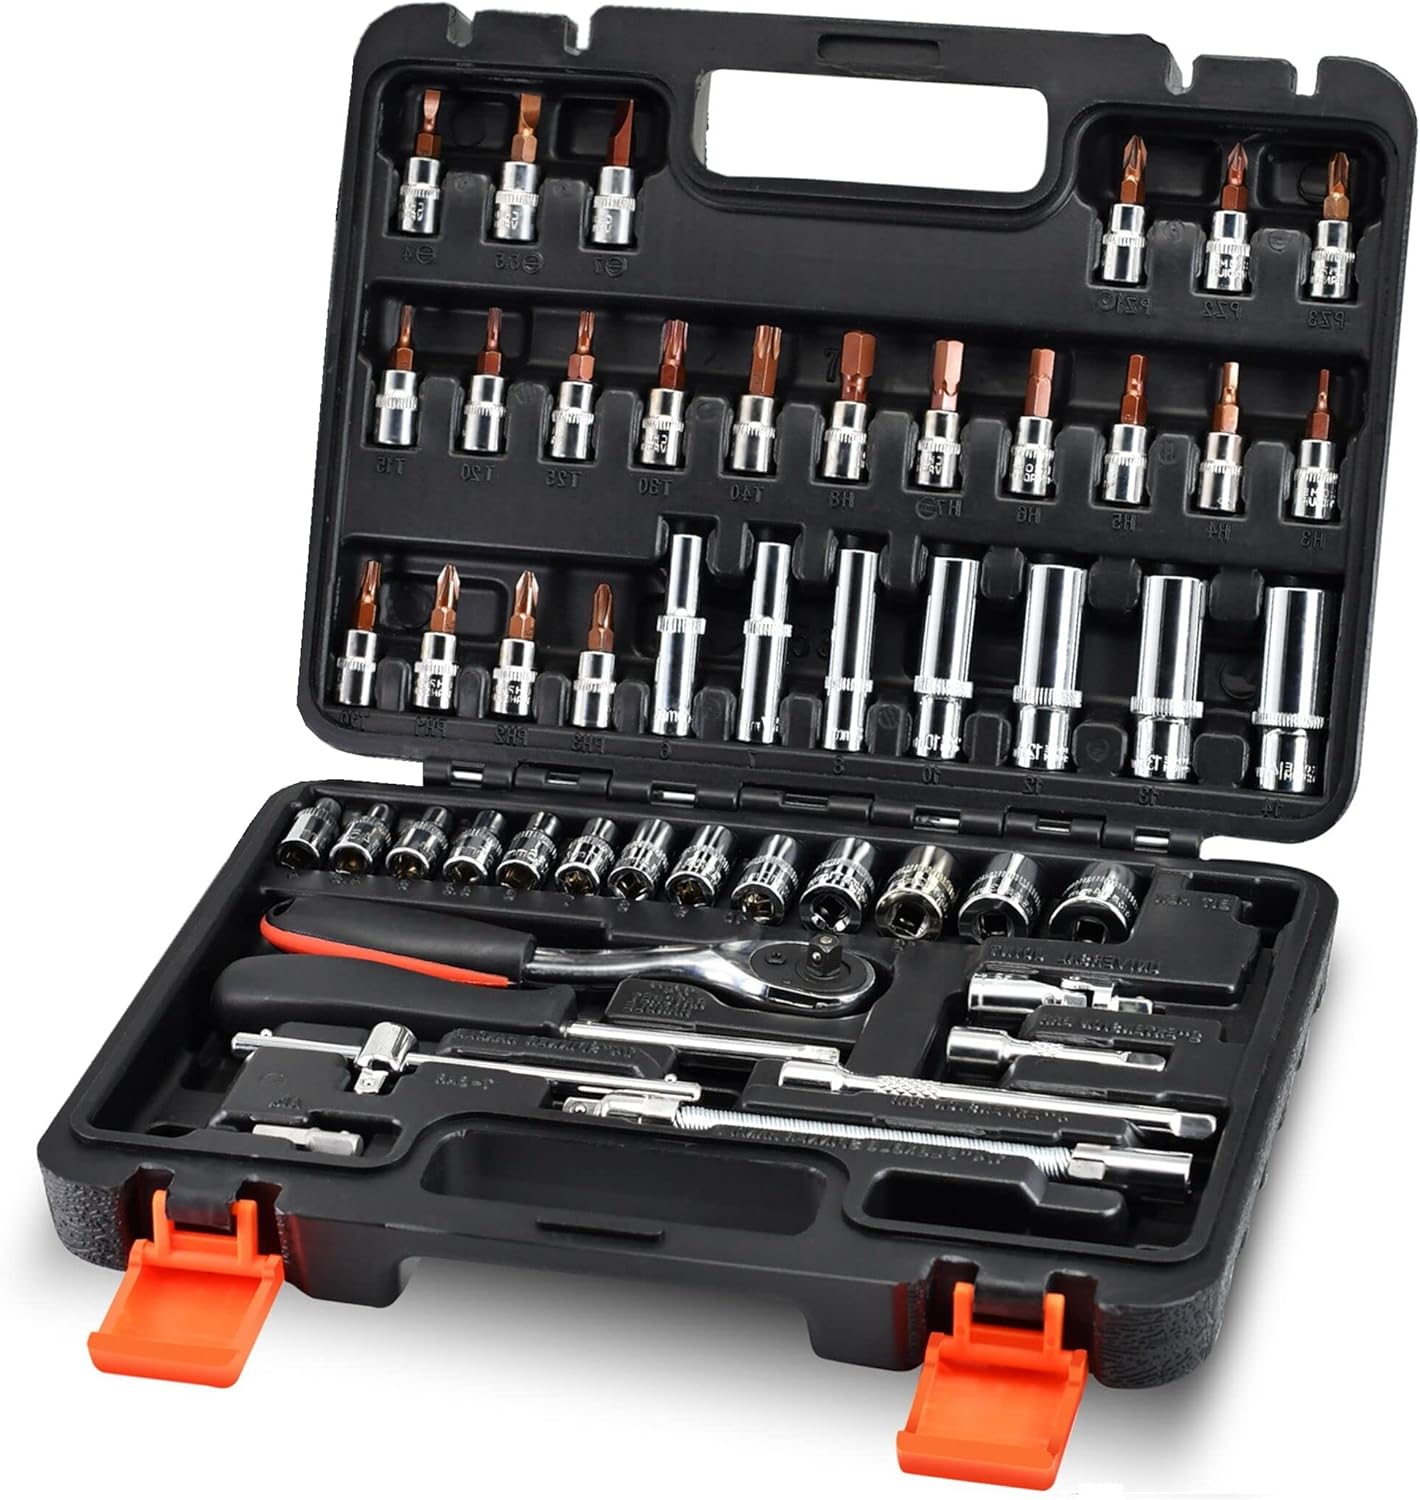 53-Piece 1/4 Socket Set,Driver Bits Metric Tool Set,72 Teeth Quick Release Ratchet Wrench Set with Flexible Extension Rods,S2 Screwdriver Bit,CRV Sockets/Deep Sockets,Tool for Car Bicycle RepairDIY